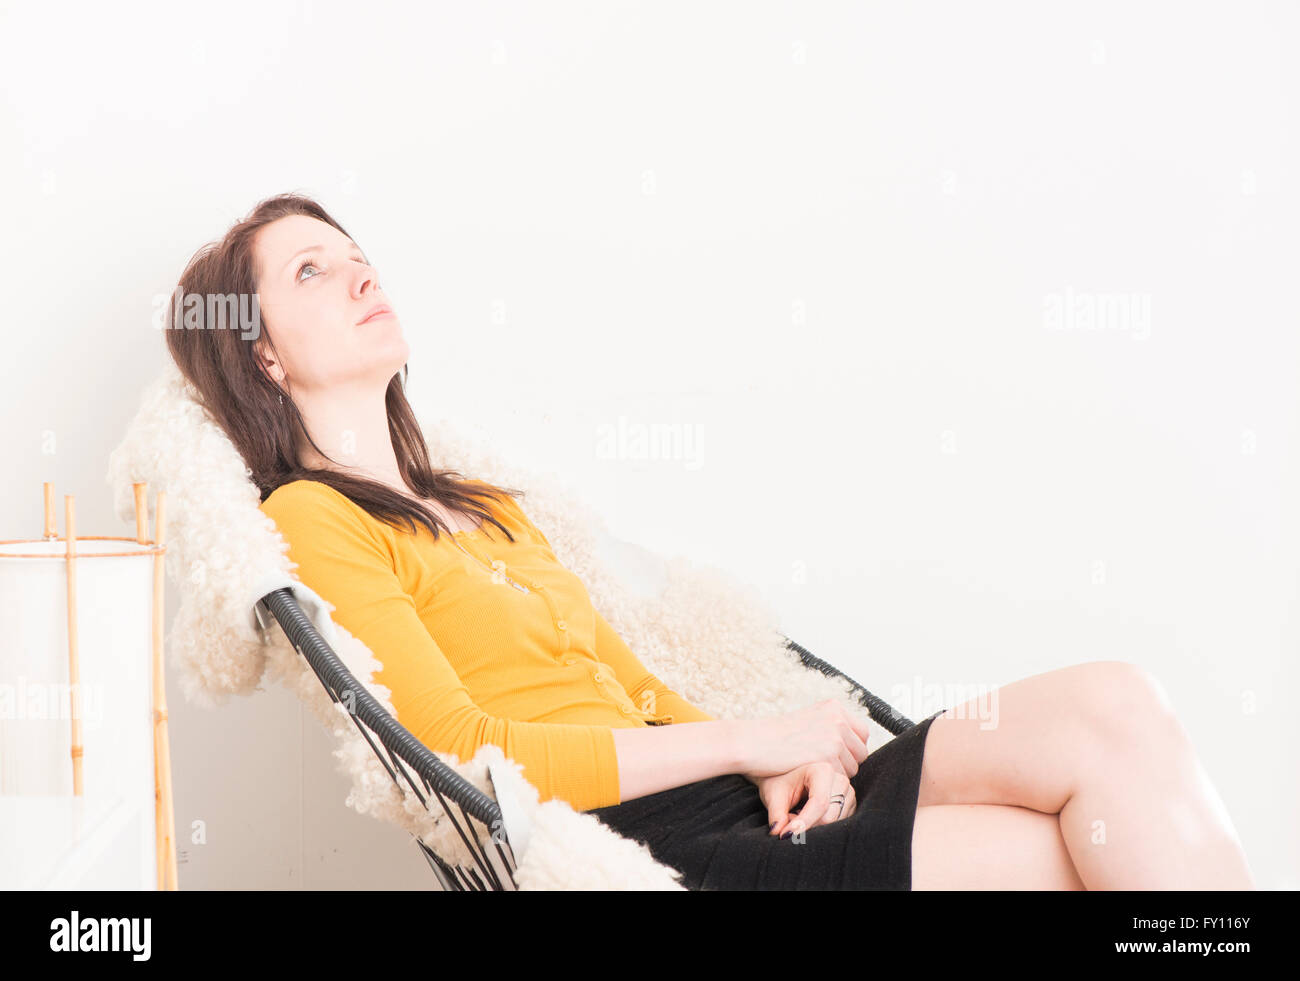 Woman sitting in chair, relaxing and staring at the ceiling. Concept of boredom, loneliness and contemplation. Stock Photo